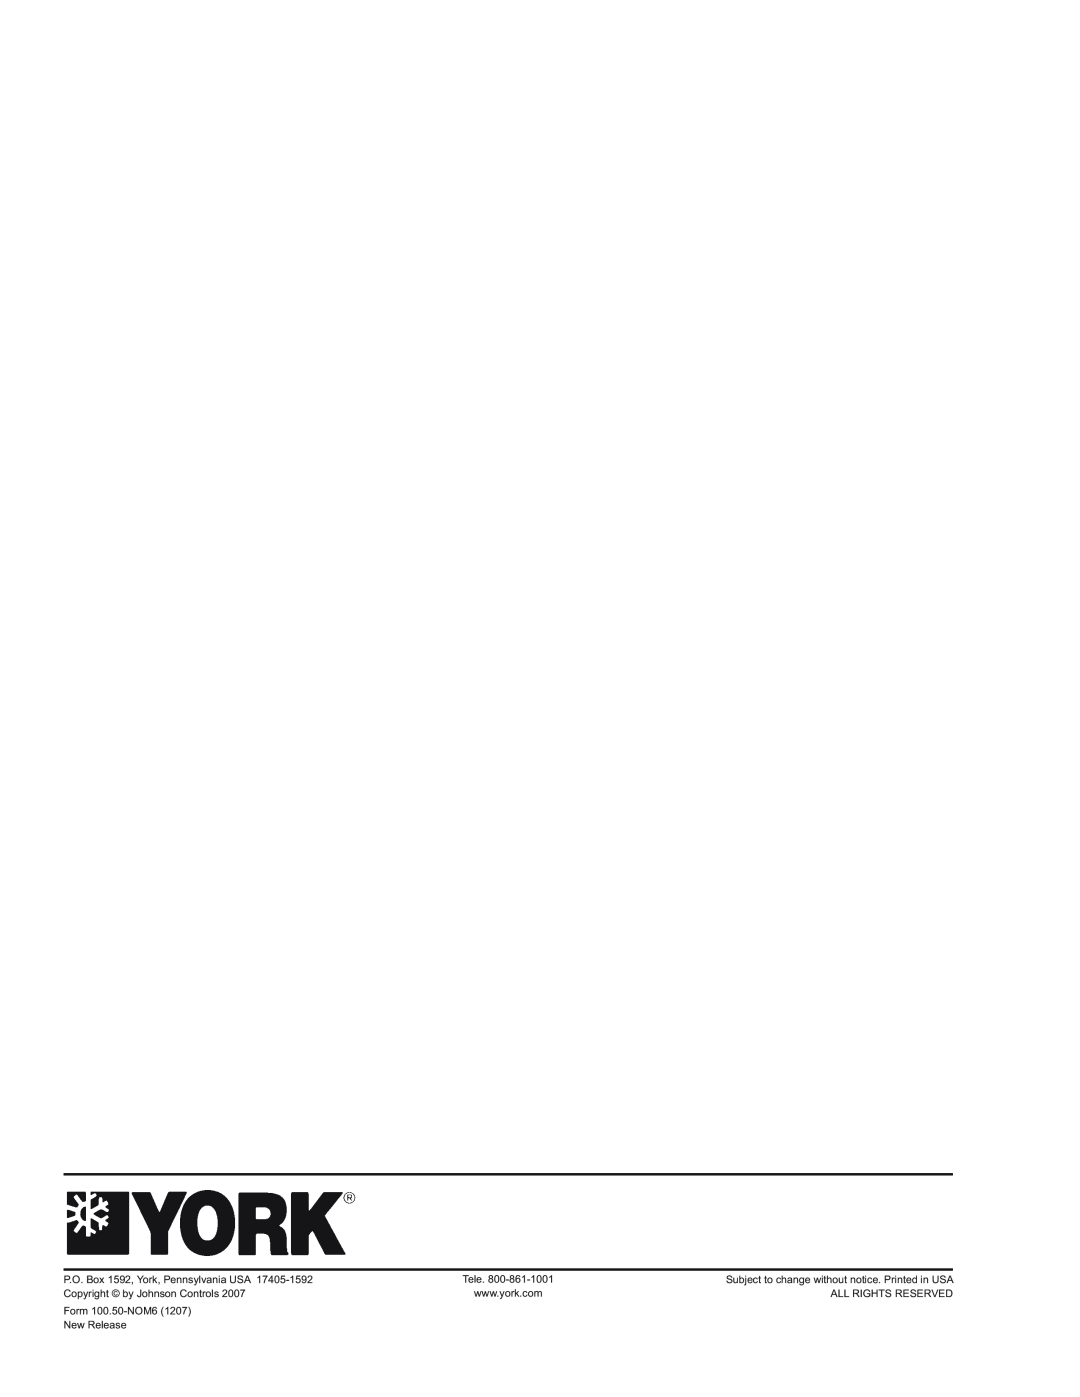 York YPAL 061 Form 100.50-NOM6 New Release, Tele, Subject to change without notice. Printed in USA, All Rights Reserved 